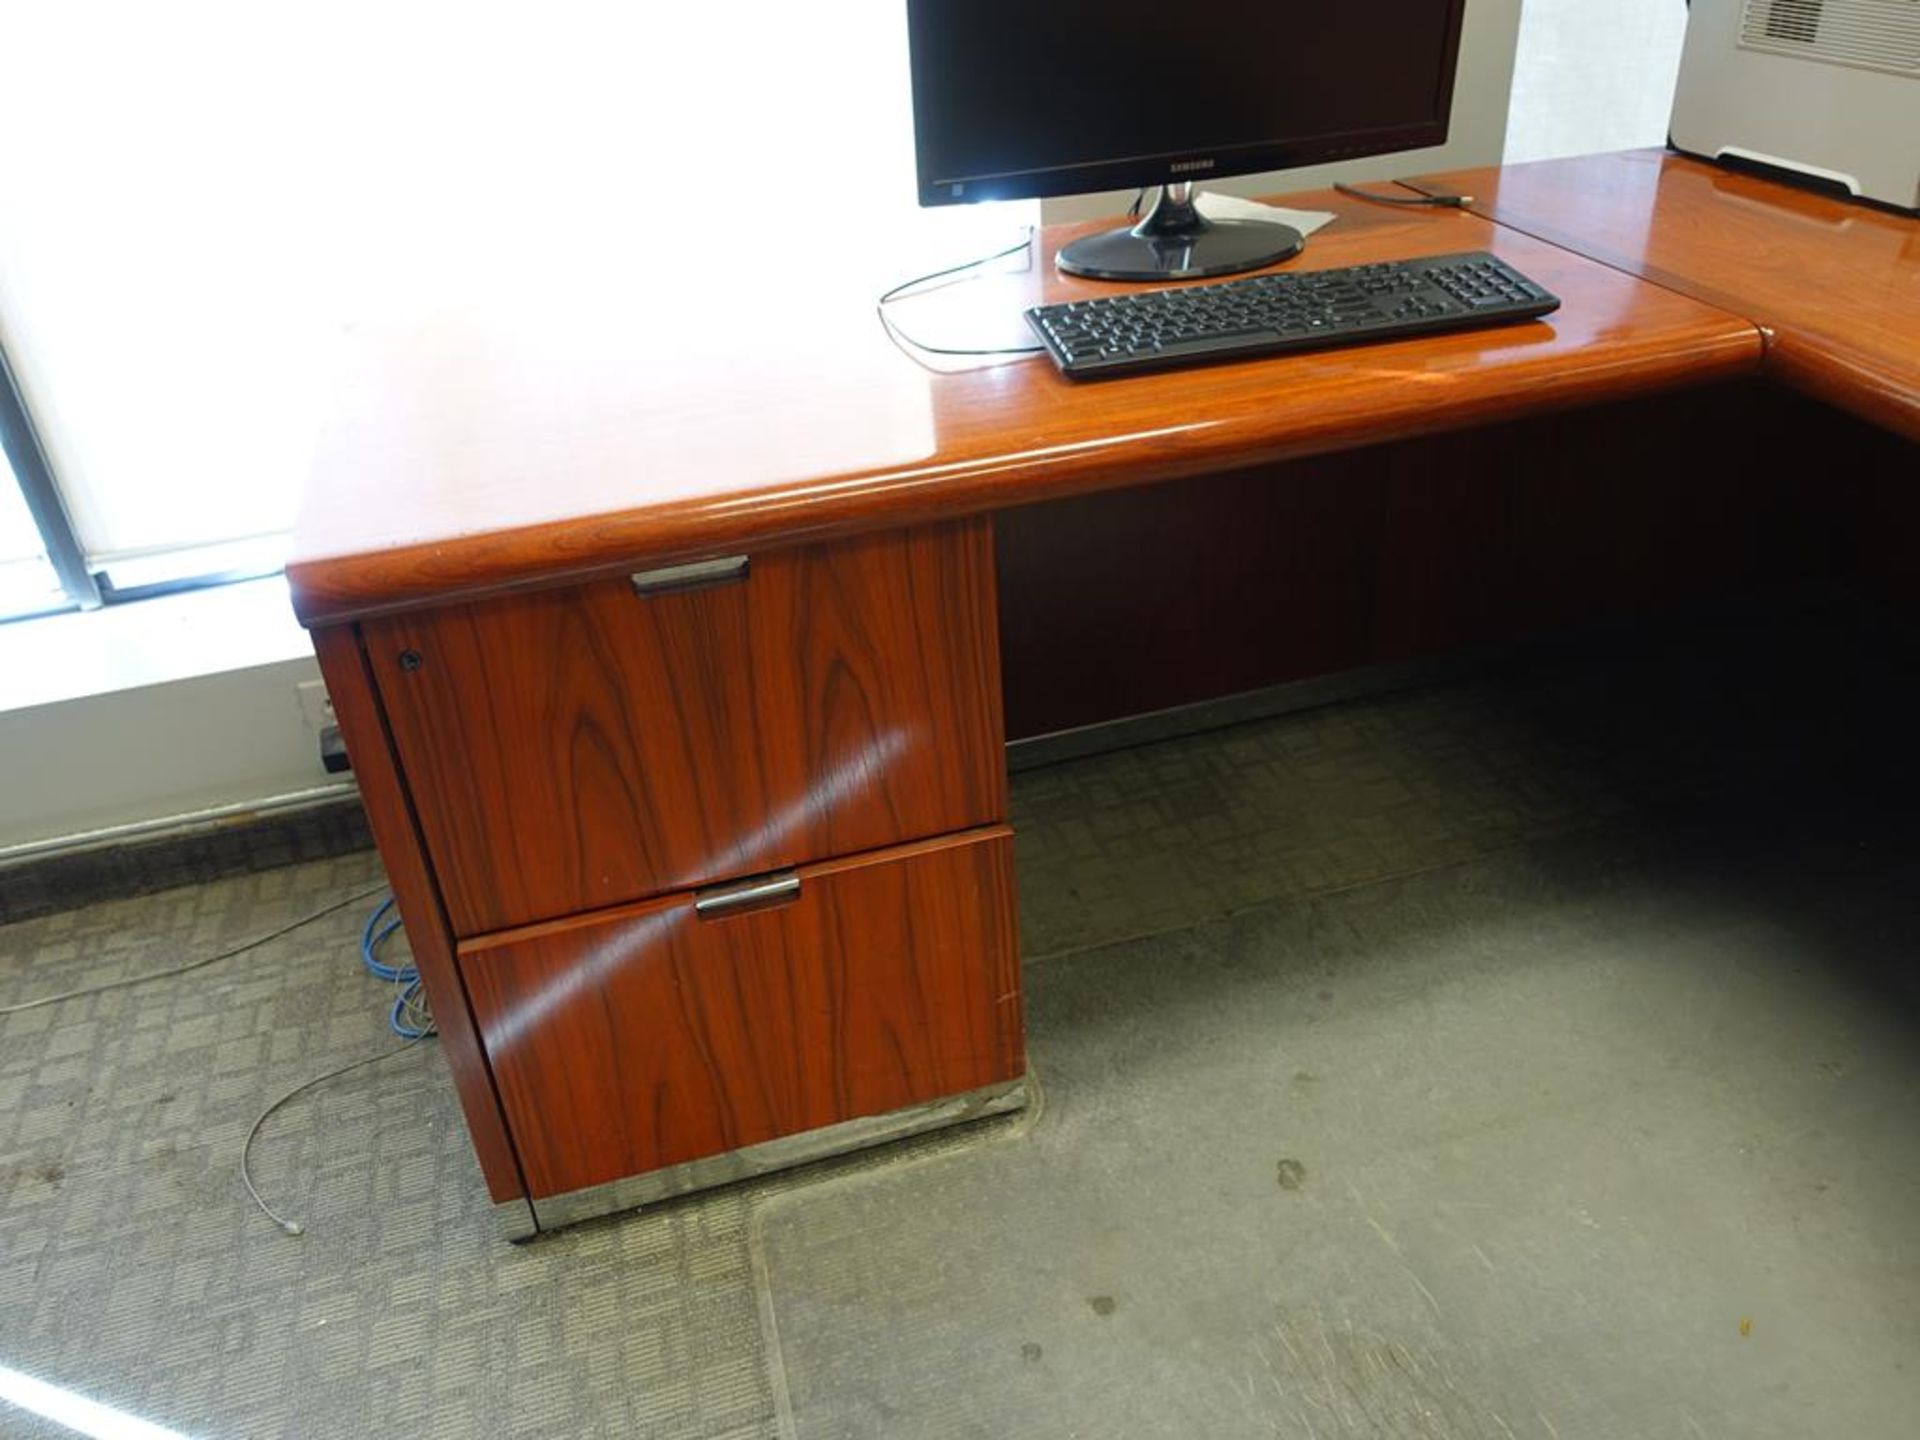 L-SHAPED, WOOD DESK WITH GLASS BOWL - Image 2 of 3